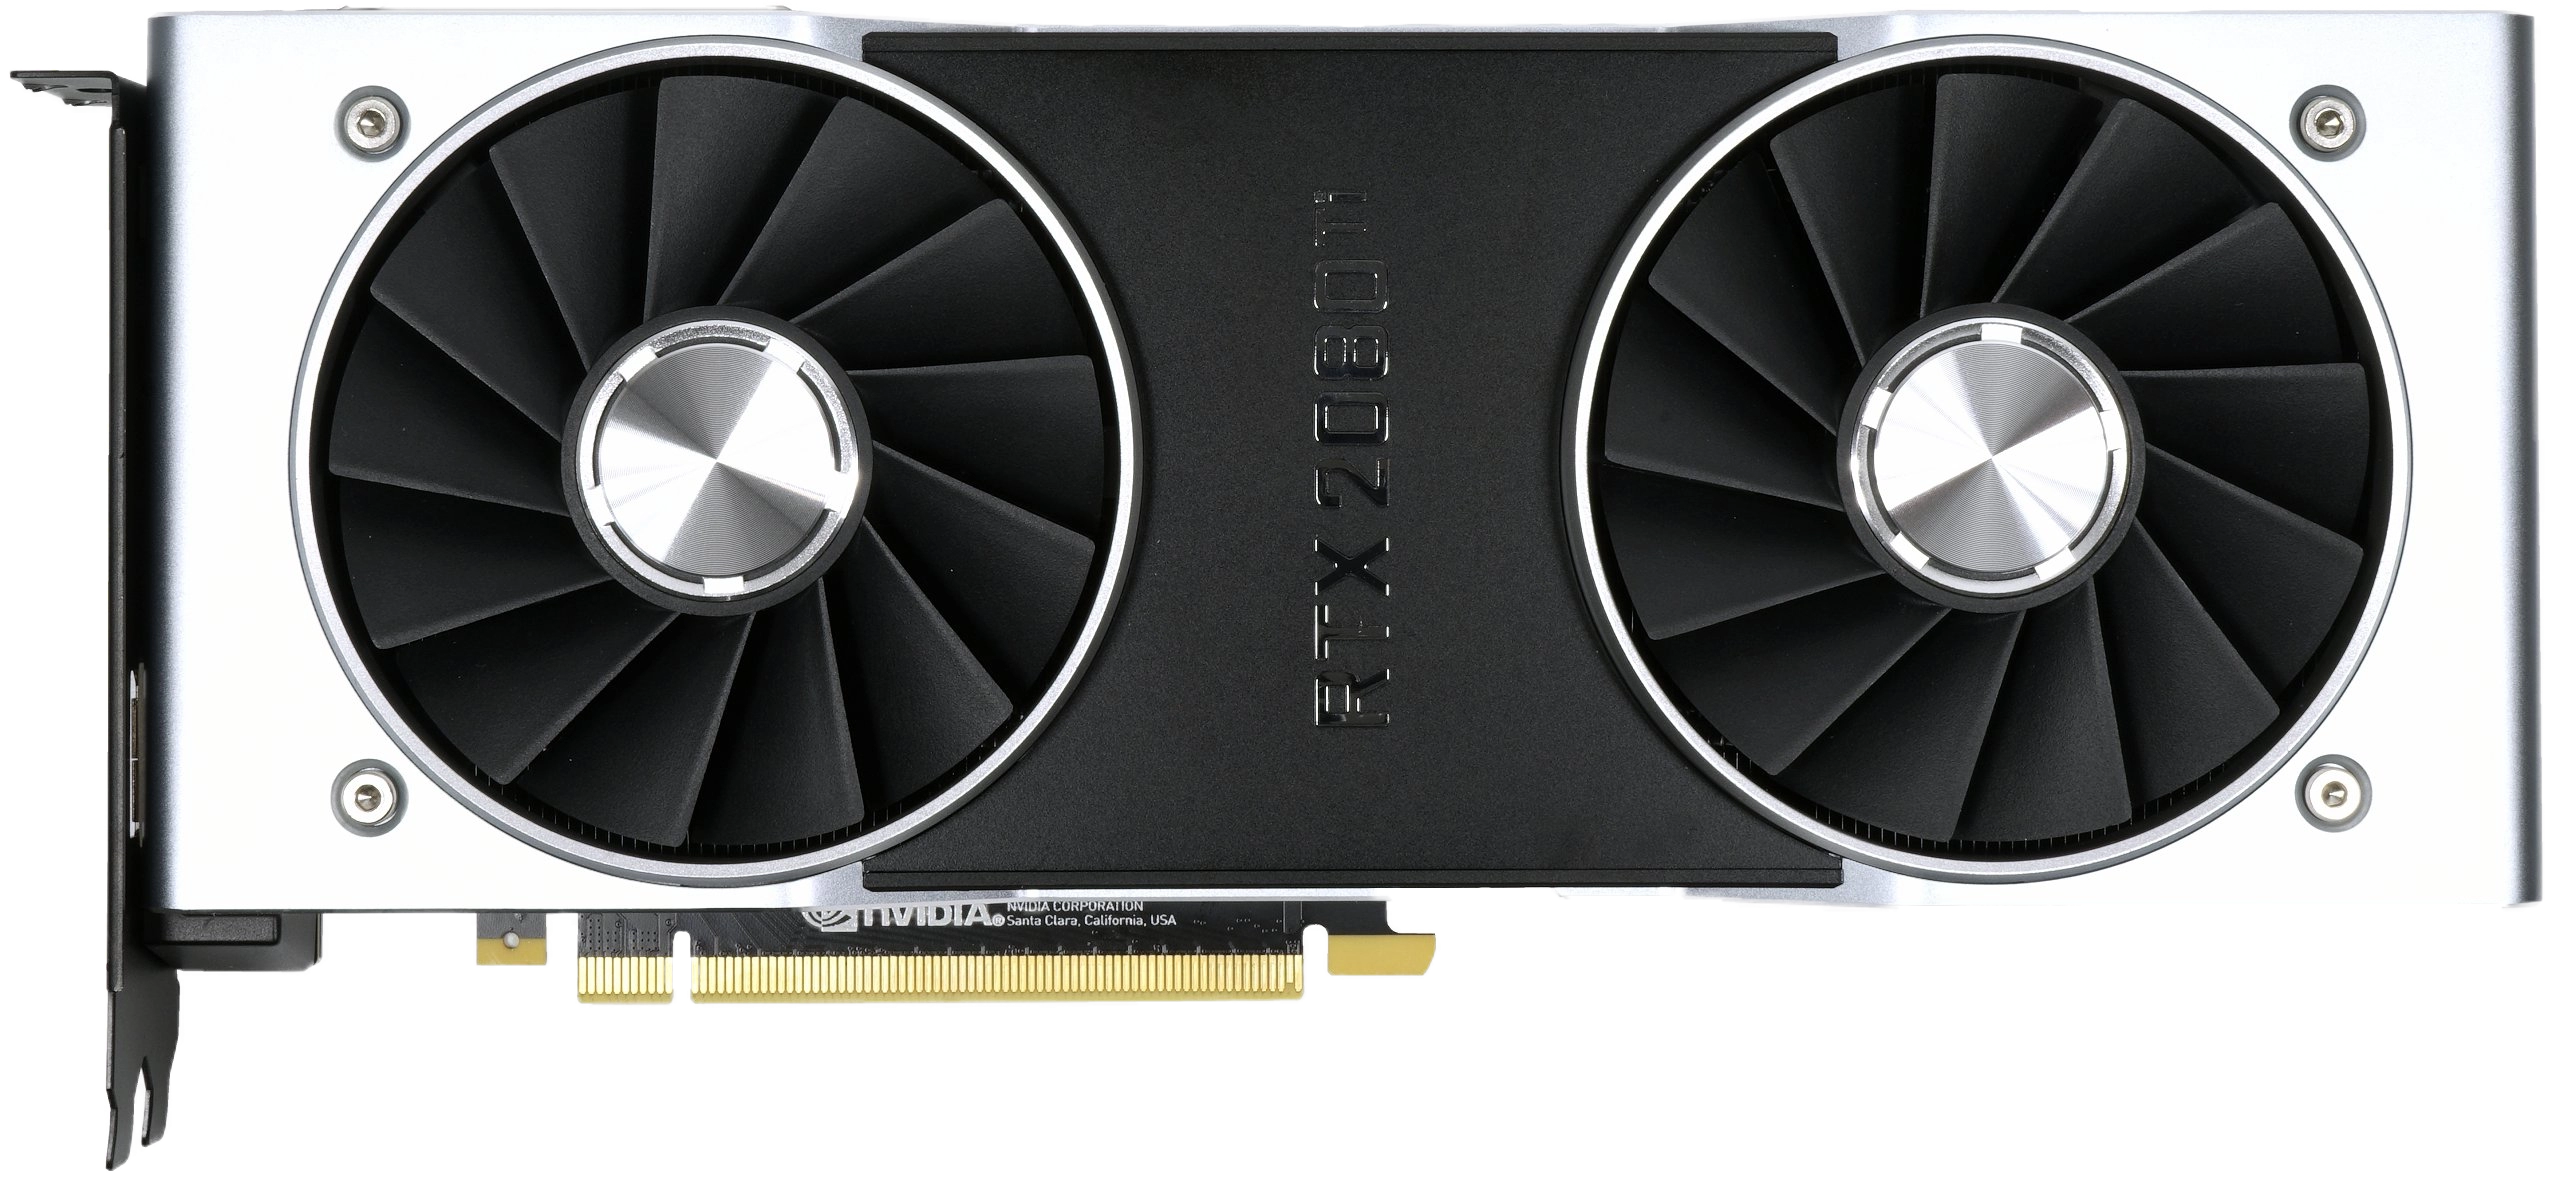 Nvidia GeForce RTX 2080 Ti Founders Edition Transparent